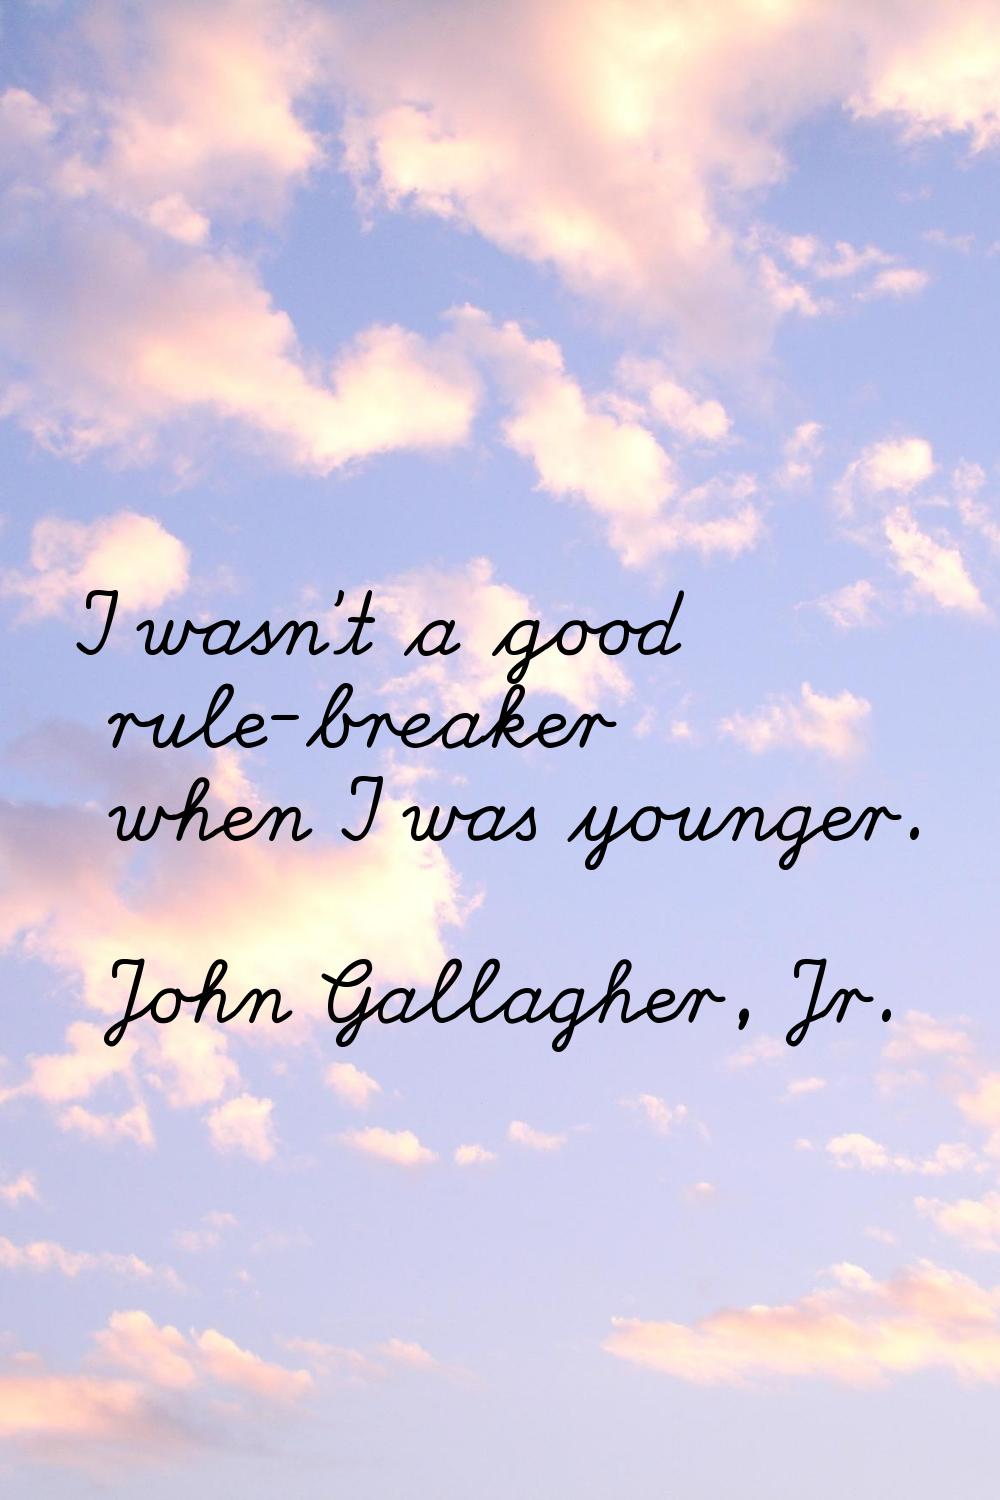 I wasn't a good rule-breaker when I was younger.